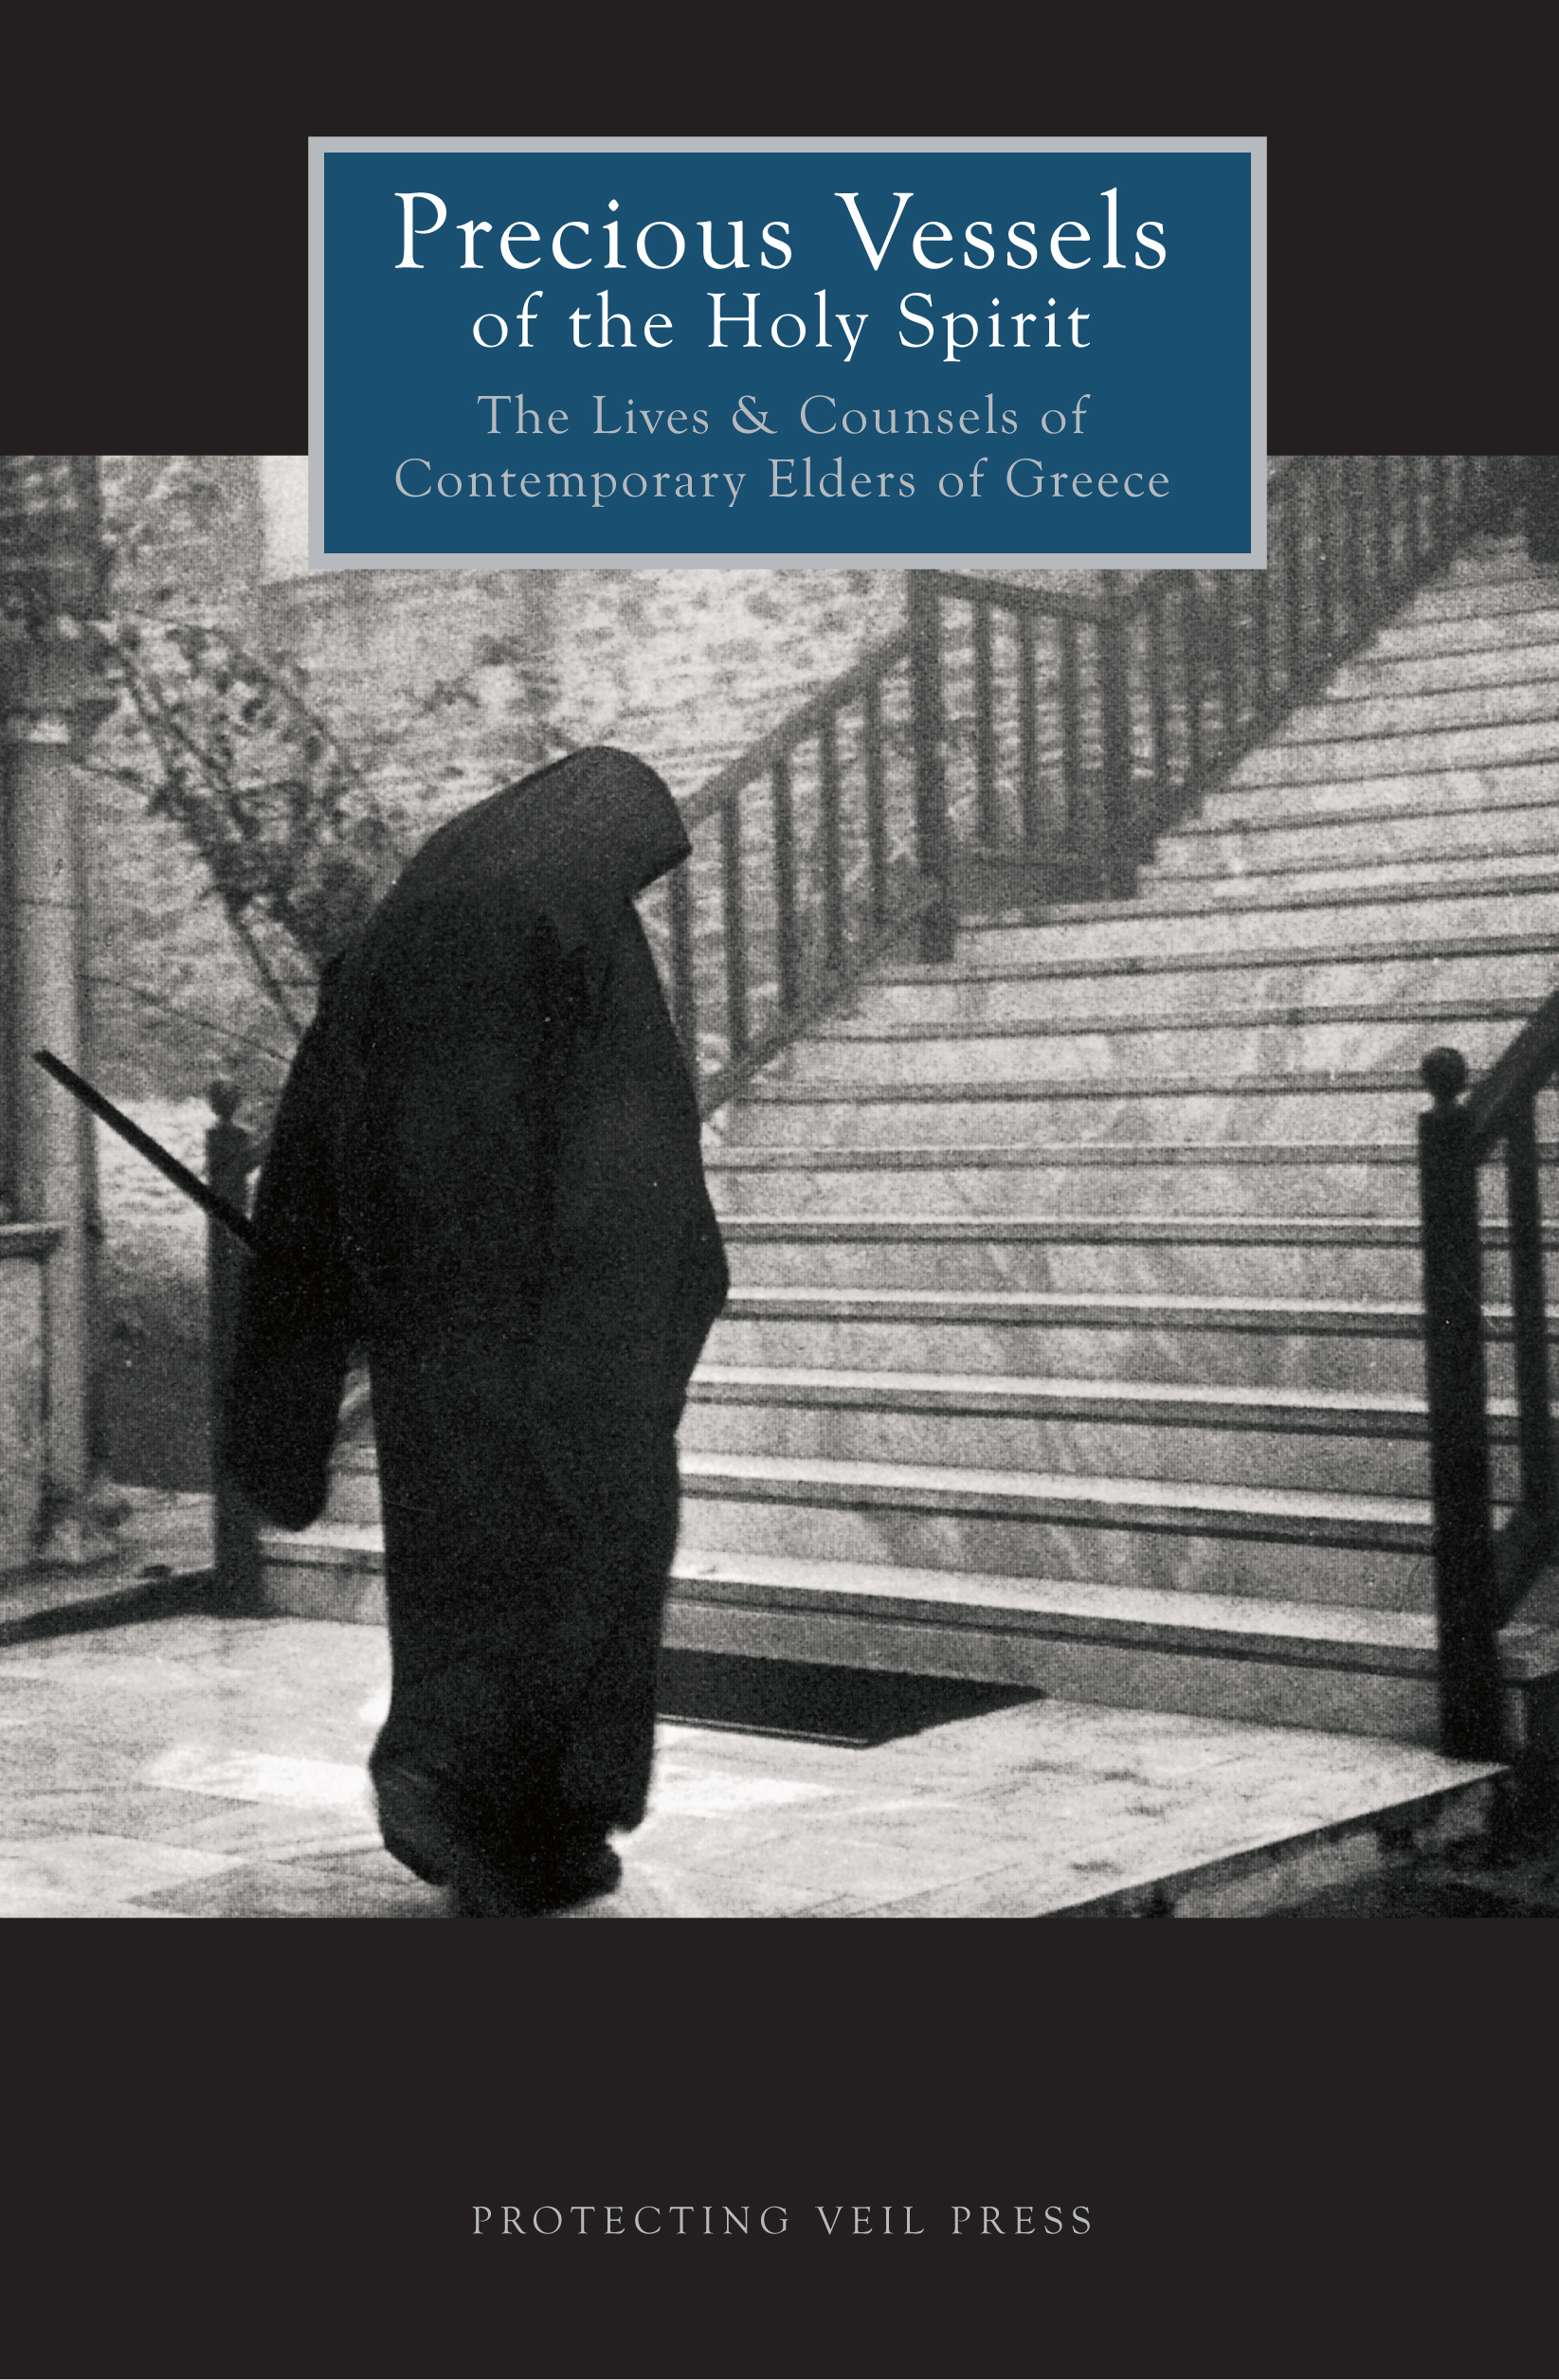 Book Cover: Herman Middleton - Precious Vessels of the Holy Spirit: The Lives and Counsels of Contemporary Elders of Greece